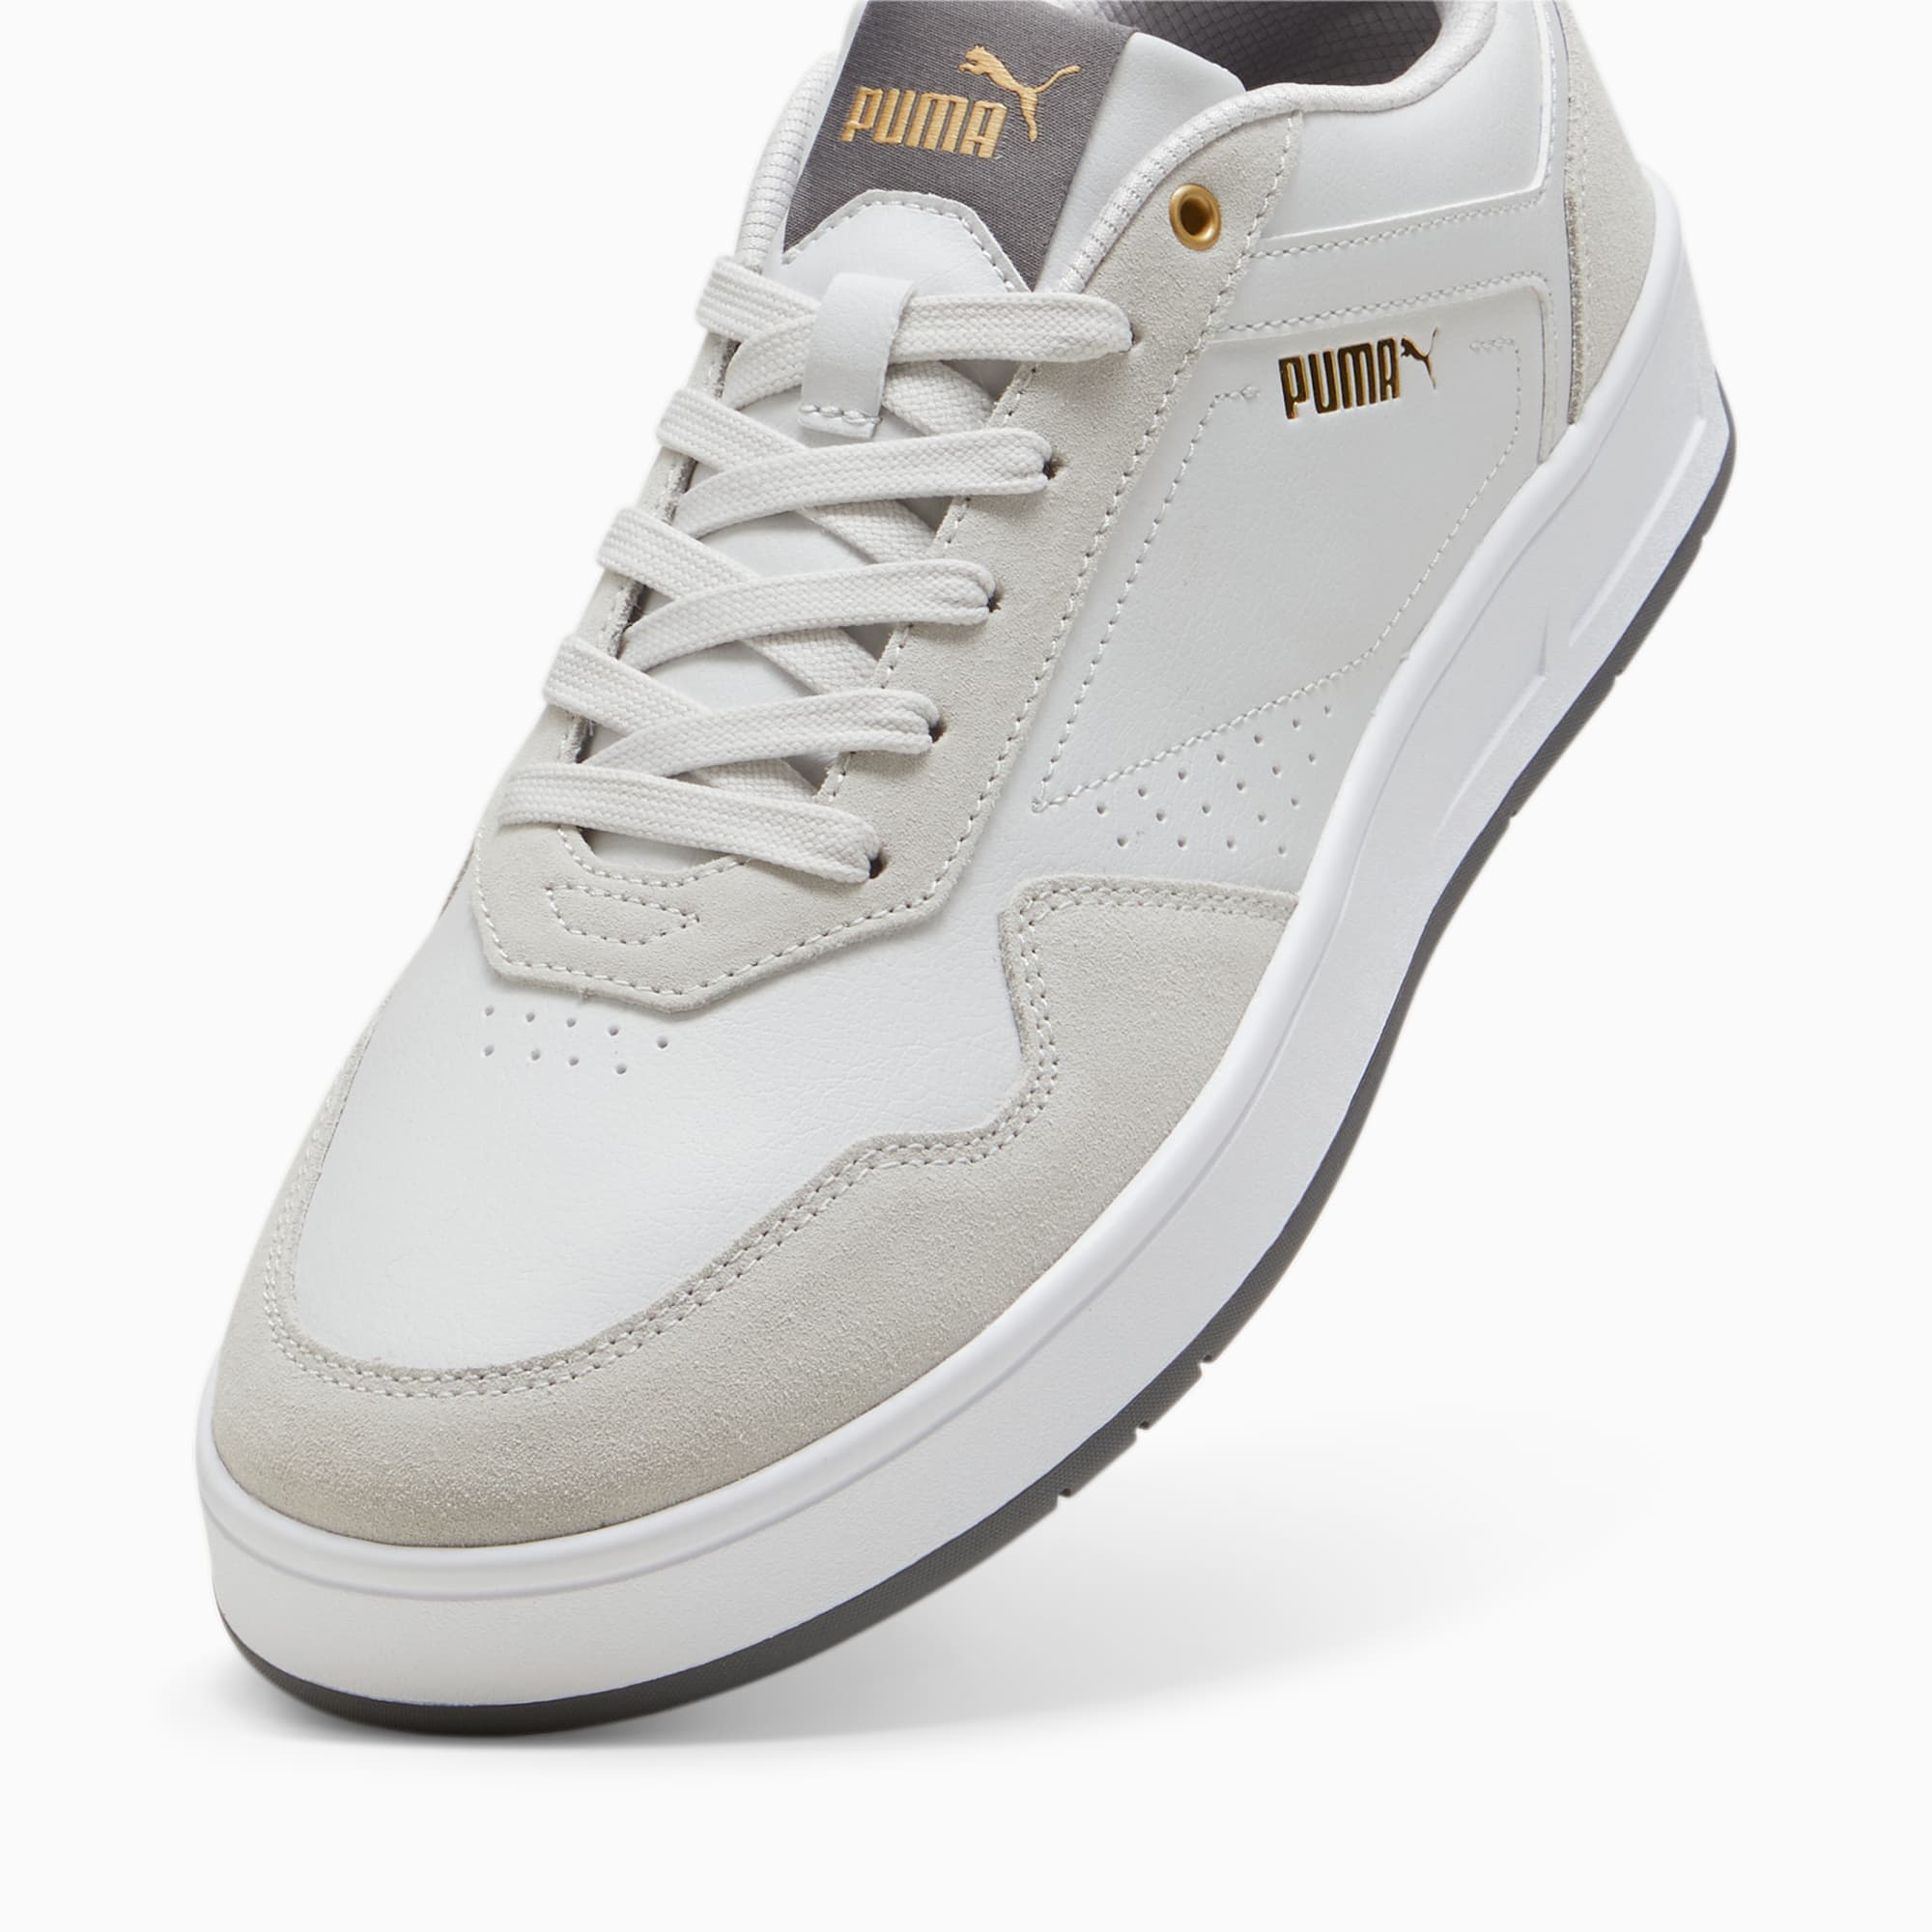 PUMA Chaussure Sneakers Classic SD, Gris/Or